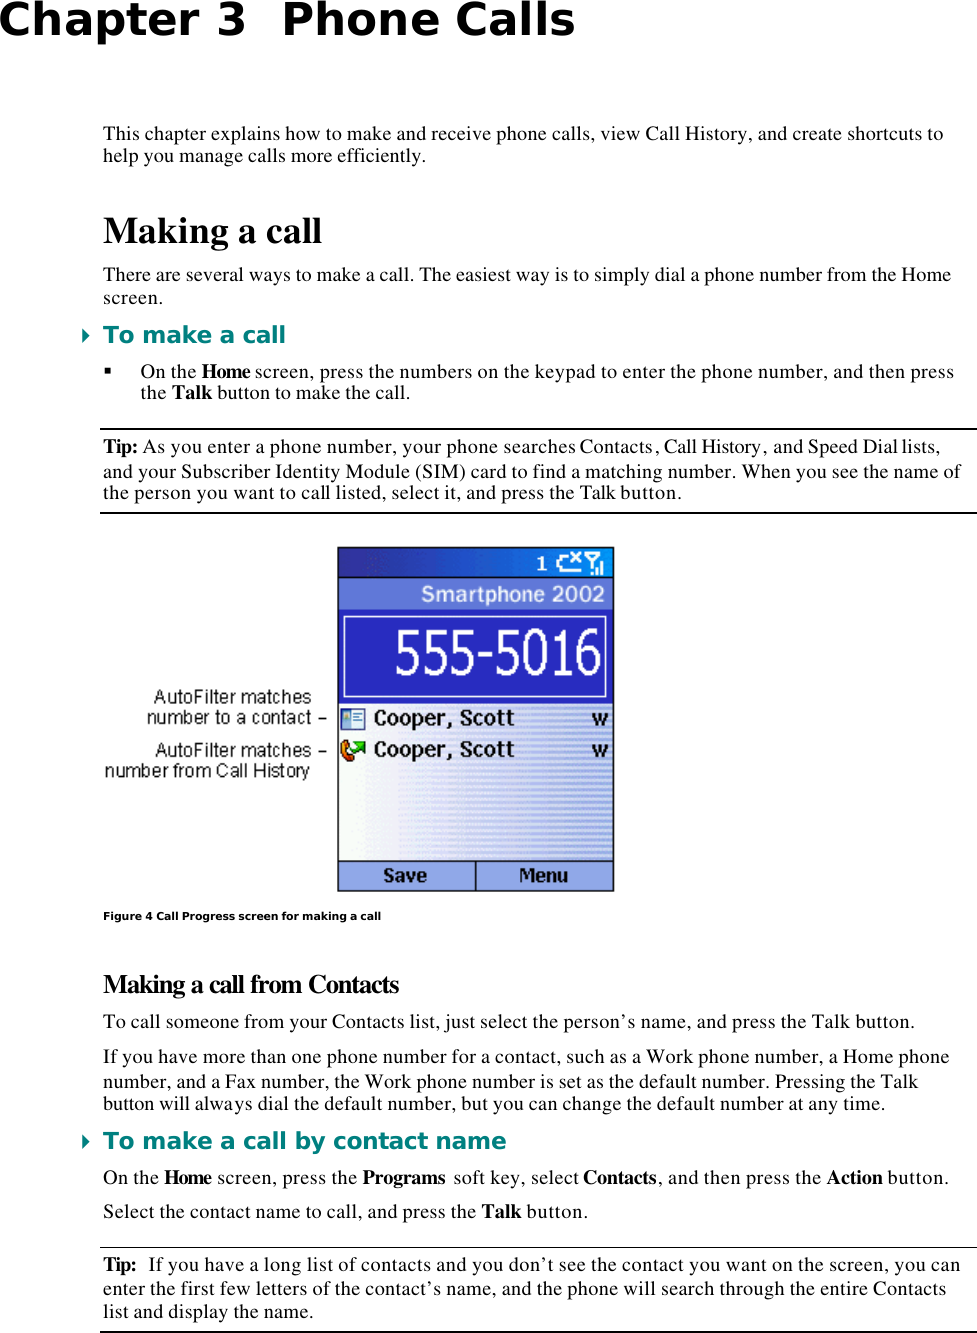 Chapter 3  Phone Calls This chapter explains how to make and receive phone calls, view Call History, and create shortcuts to help you manage calls more efficiently. Making a call There are several ways to make a call. The easiest way is to simply dial a phone number from the Home screen. 4 To make a call § On the Home screen, press the numbers on the keypad to enter the phone number, and then press the Talk button to make the call. Tip: As you enter a phone number, your phone searches Contacts, Call History, and Speed Dial lists, and your Subscriber Identity Module (SIM) card to find a matching number. When you see the name of the person you want to call listed, select it, and press the Talk button.  Figure 4 Call Progress screen for making a call Making a call from Contacts To call someone from your Contacts list, just select the person’s name, and press the Talk button. If you have more than one phone number for a contact, such as a Work phone number, a Home phone number, and a Fax number, the Work phone number is set as the default number. Pressing the Talk button will always dial the default number, but you can change the default number at any time. 4 To make a call by contact name On the Home screen, press the Programs soft key, select Contacts, and then press the Action button. Select the contact name to call, and press the Talk button. Tip: If you have a long list of contacts and you don’t see the contact you want on the screen, you can enter the first few letters of the contact’s name, and the phone will search through the entire Contacts list and display the name. 